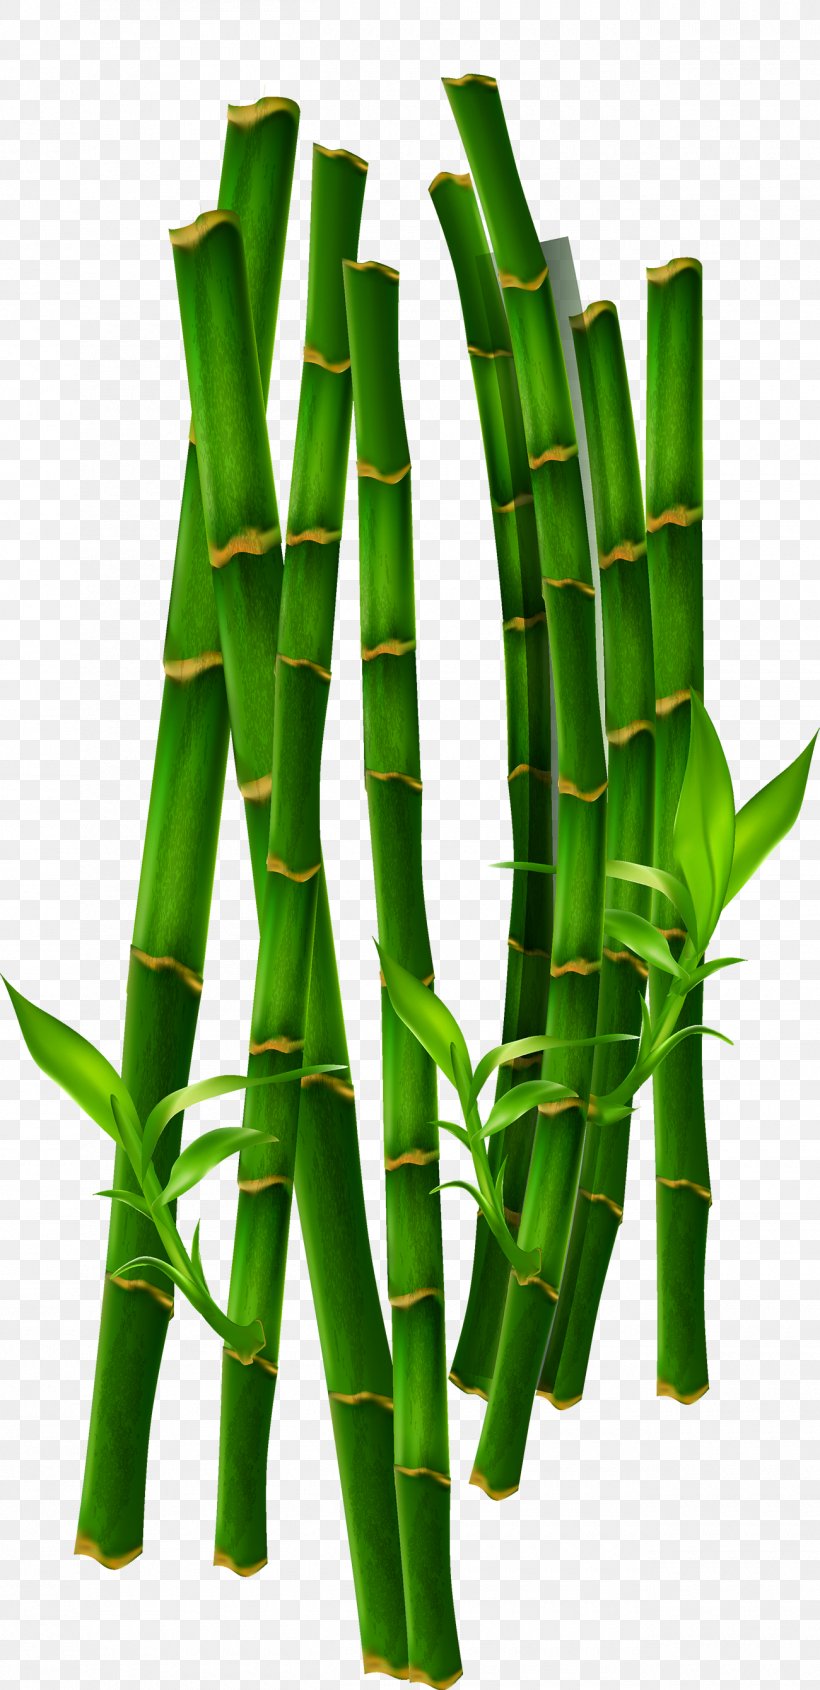 Bamboo Bamboe Computer File, PNG, 1300x2680px, Bamboo, Bamboe, Flowerpot, Grass, Grass Family Download Free